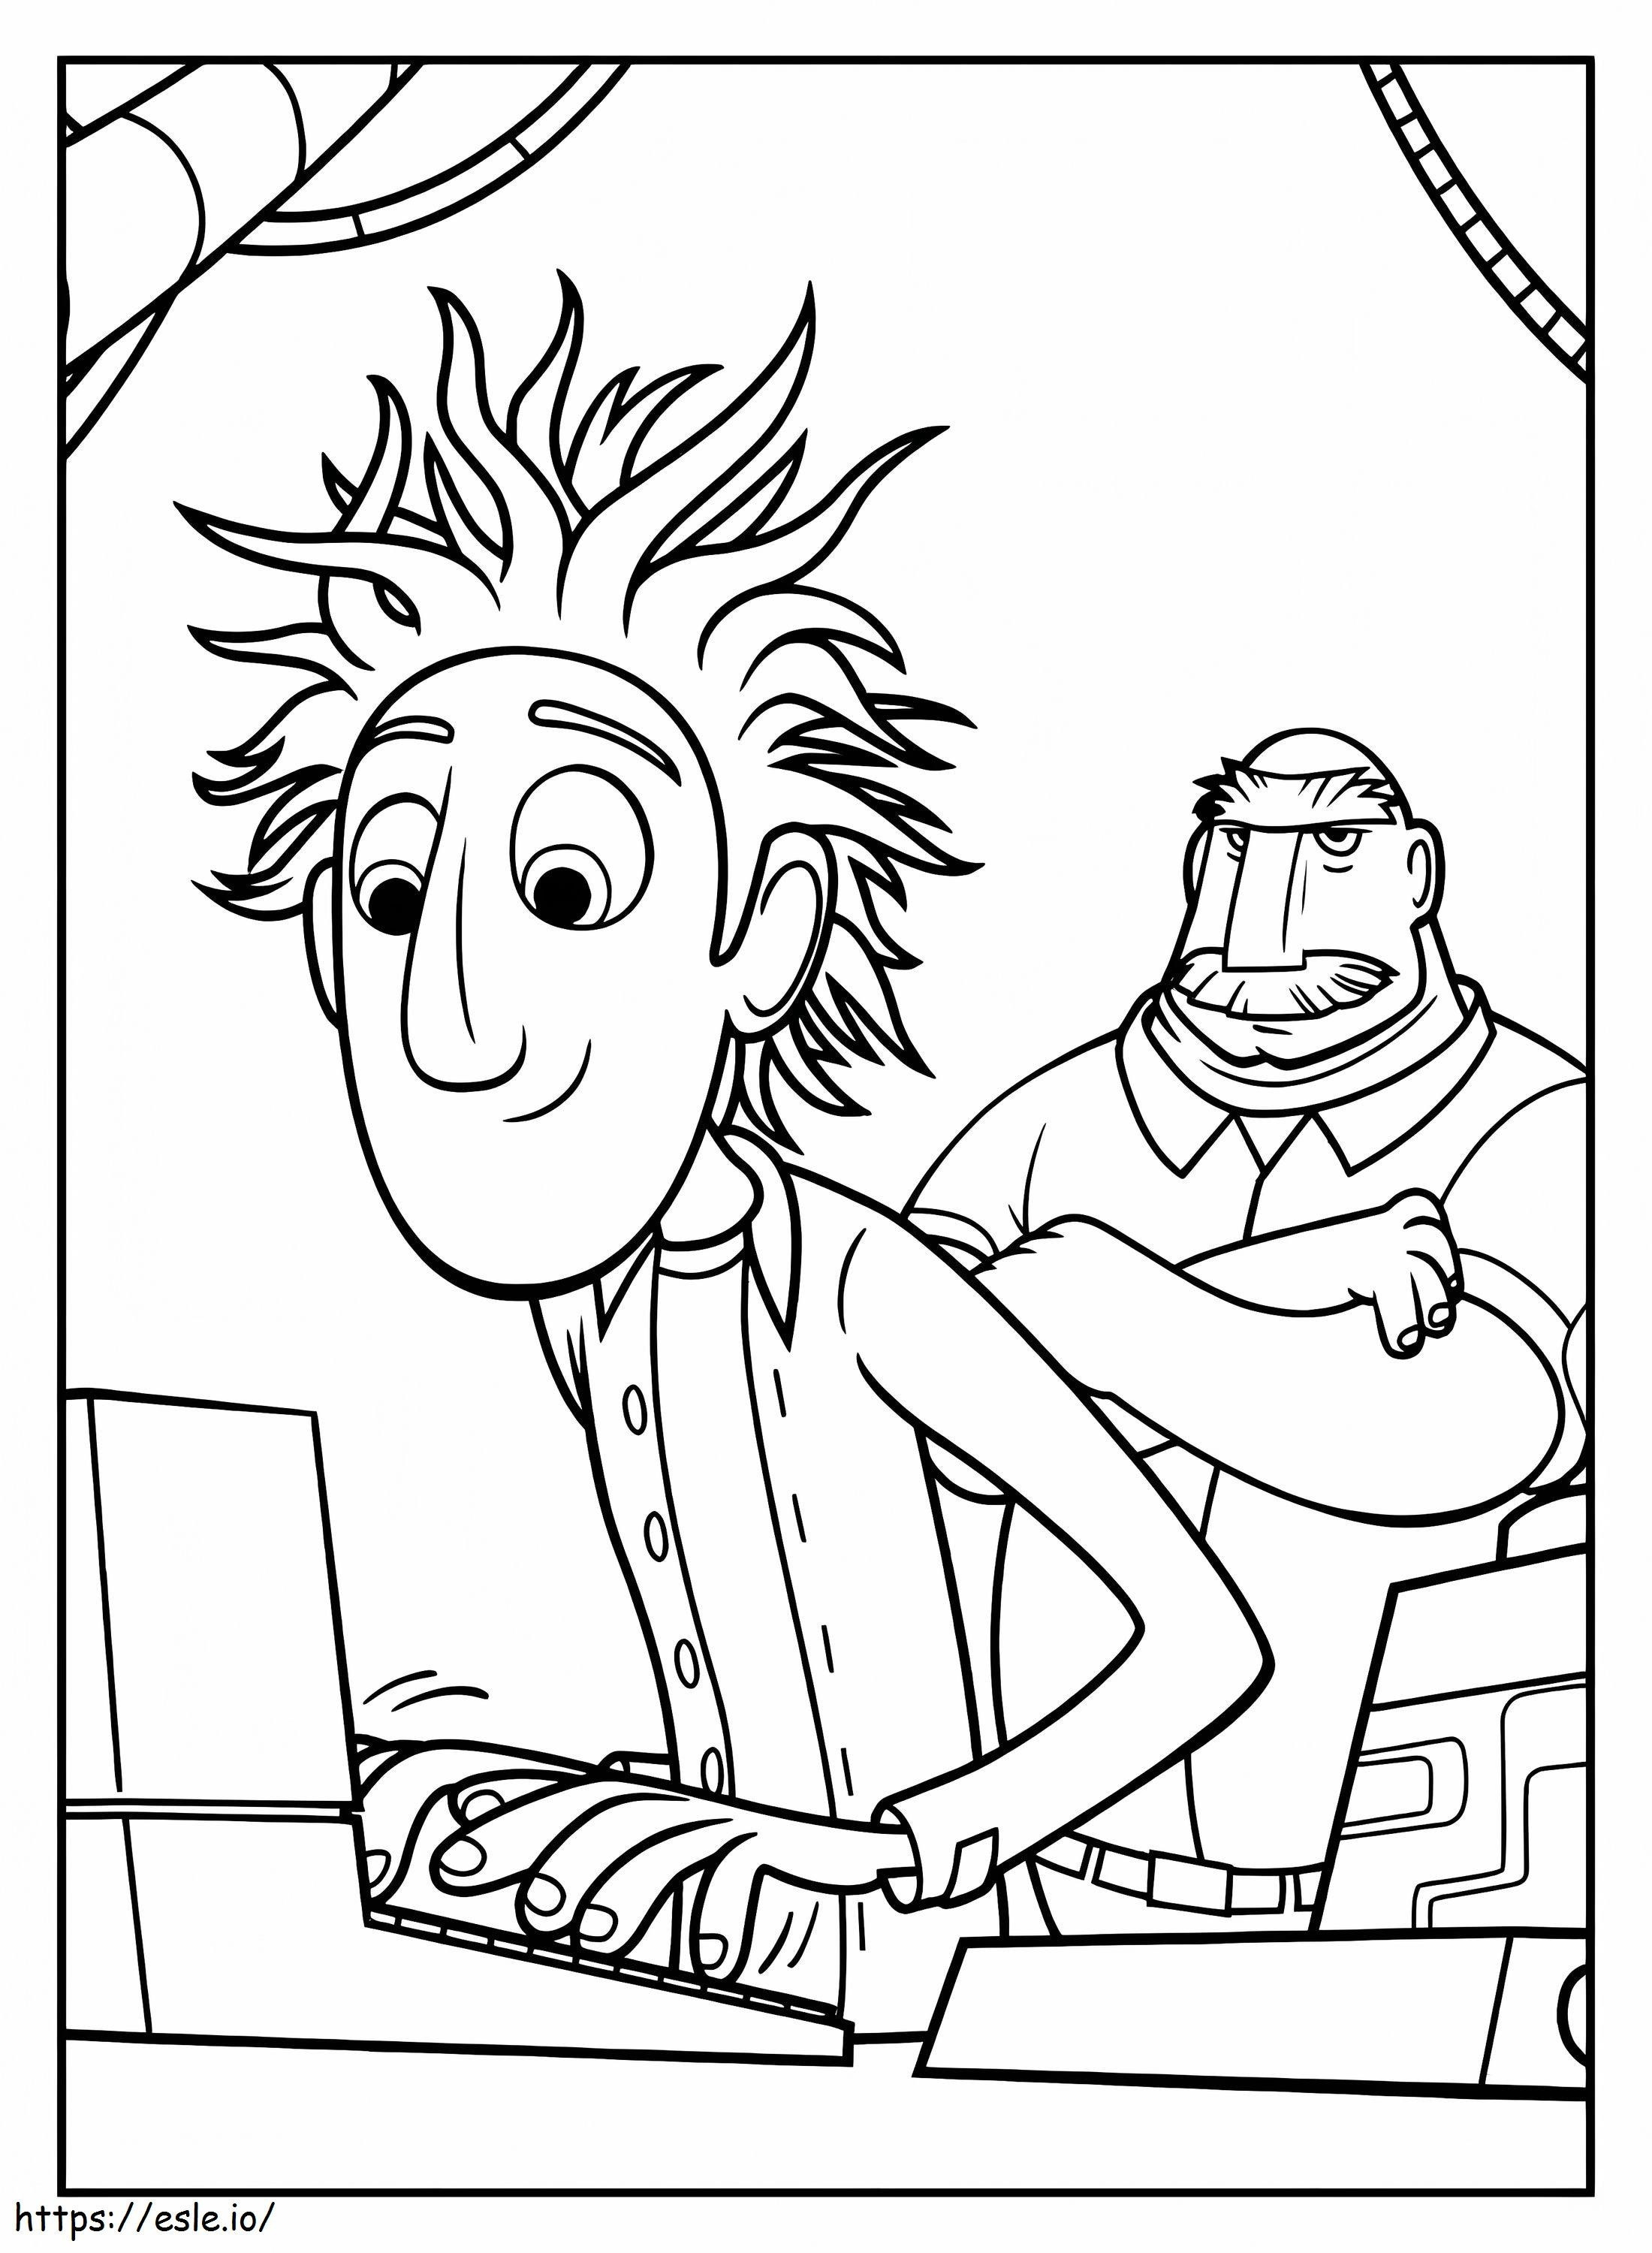 Flint Lockwood And Dad coloring page